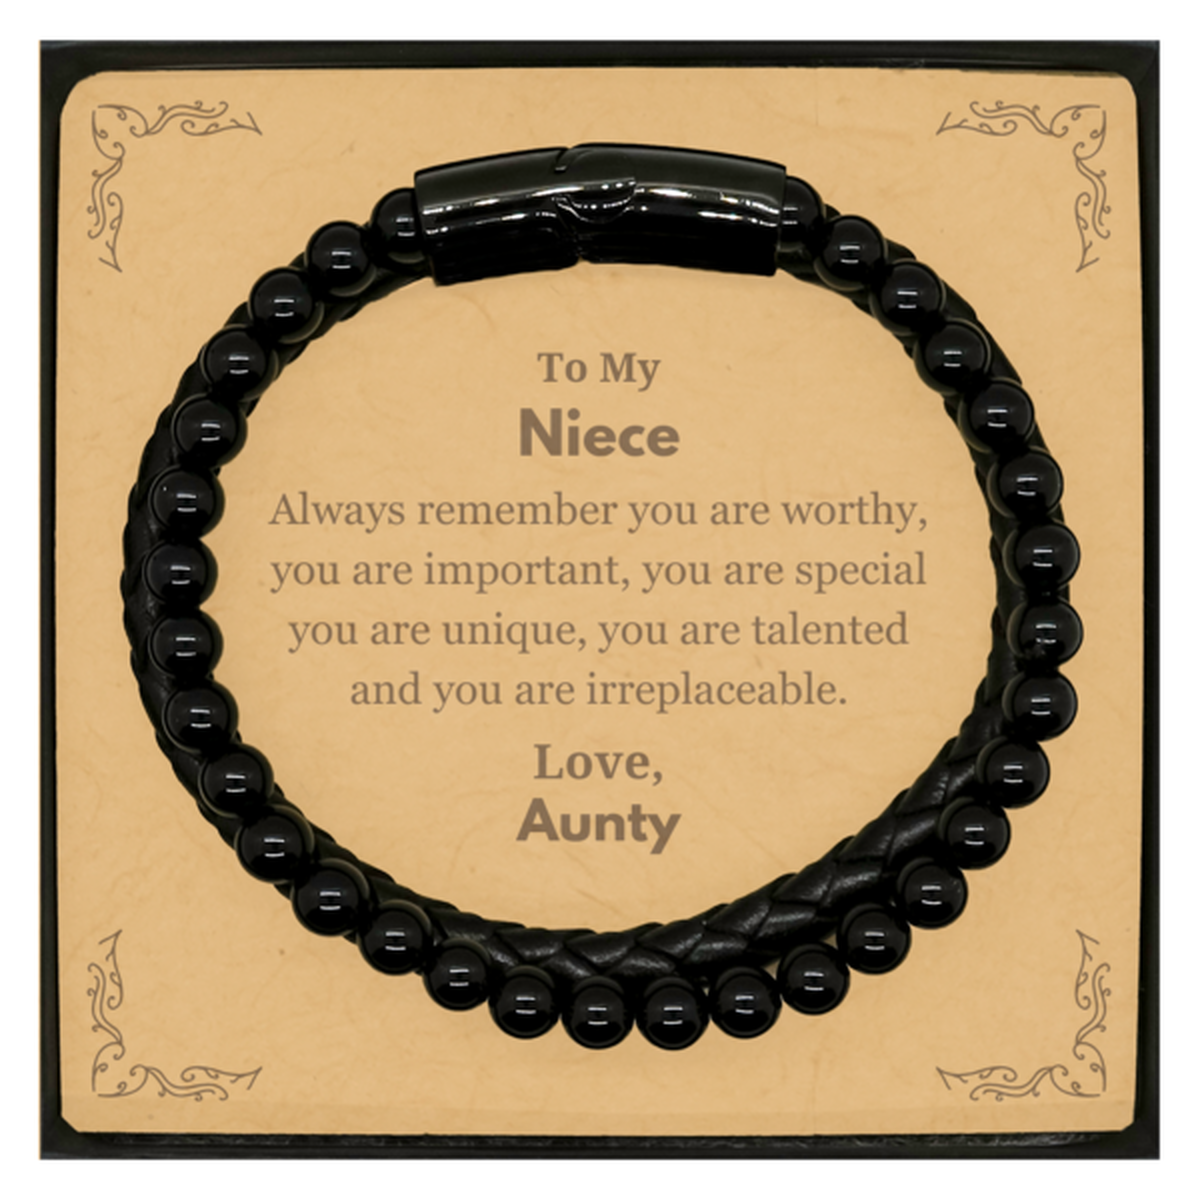 Niece Birthday Gifts from Aunty, Inspirational Stone Leather Bracelets for Niece Christmas Graduation Gifts for Niece Always remember you are worthy, you are important. Love, Aunty